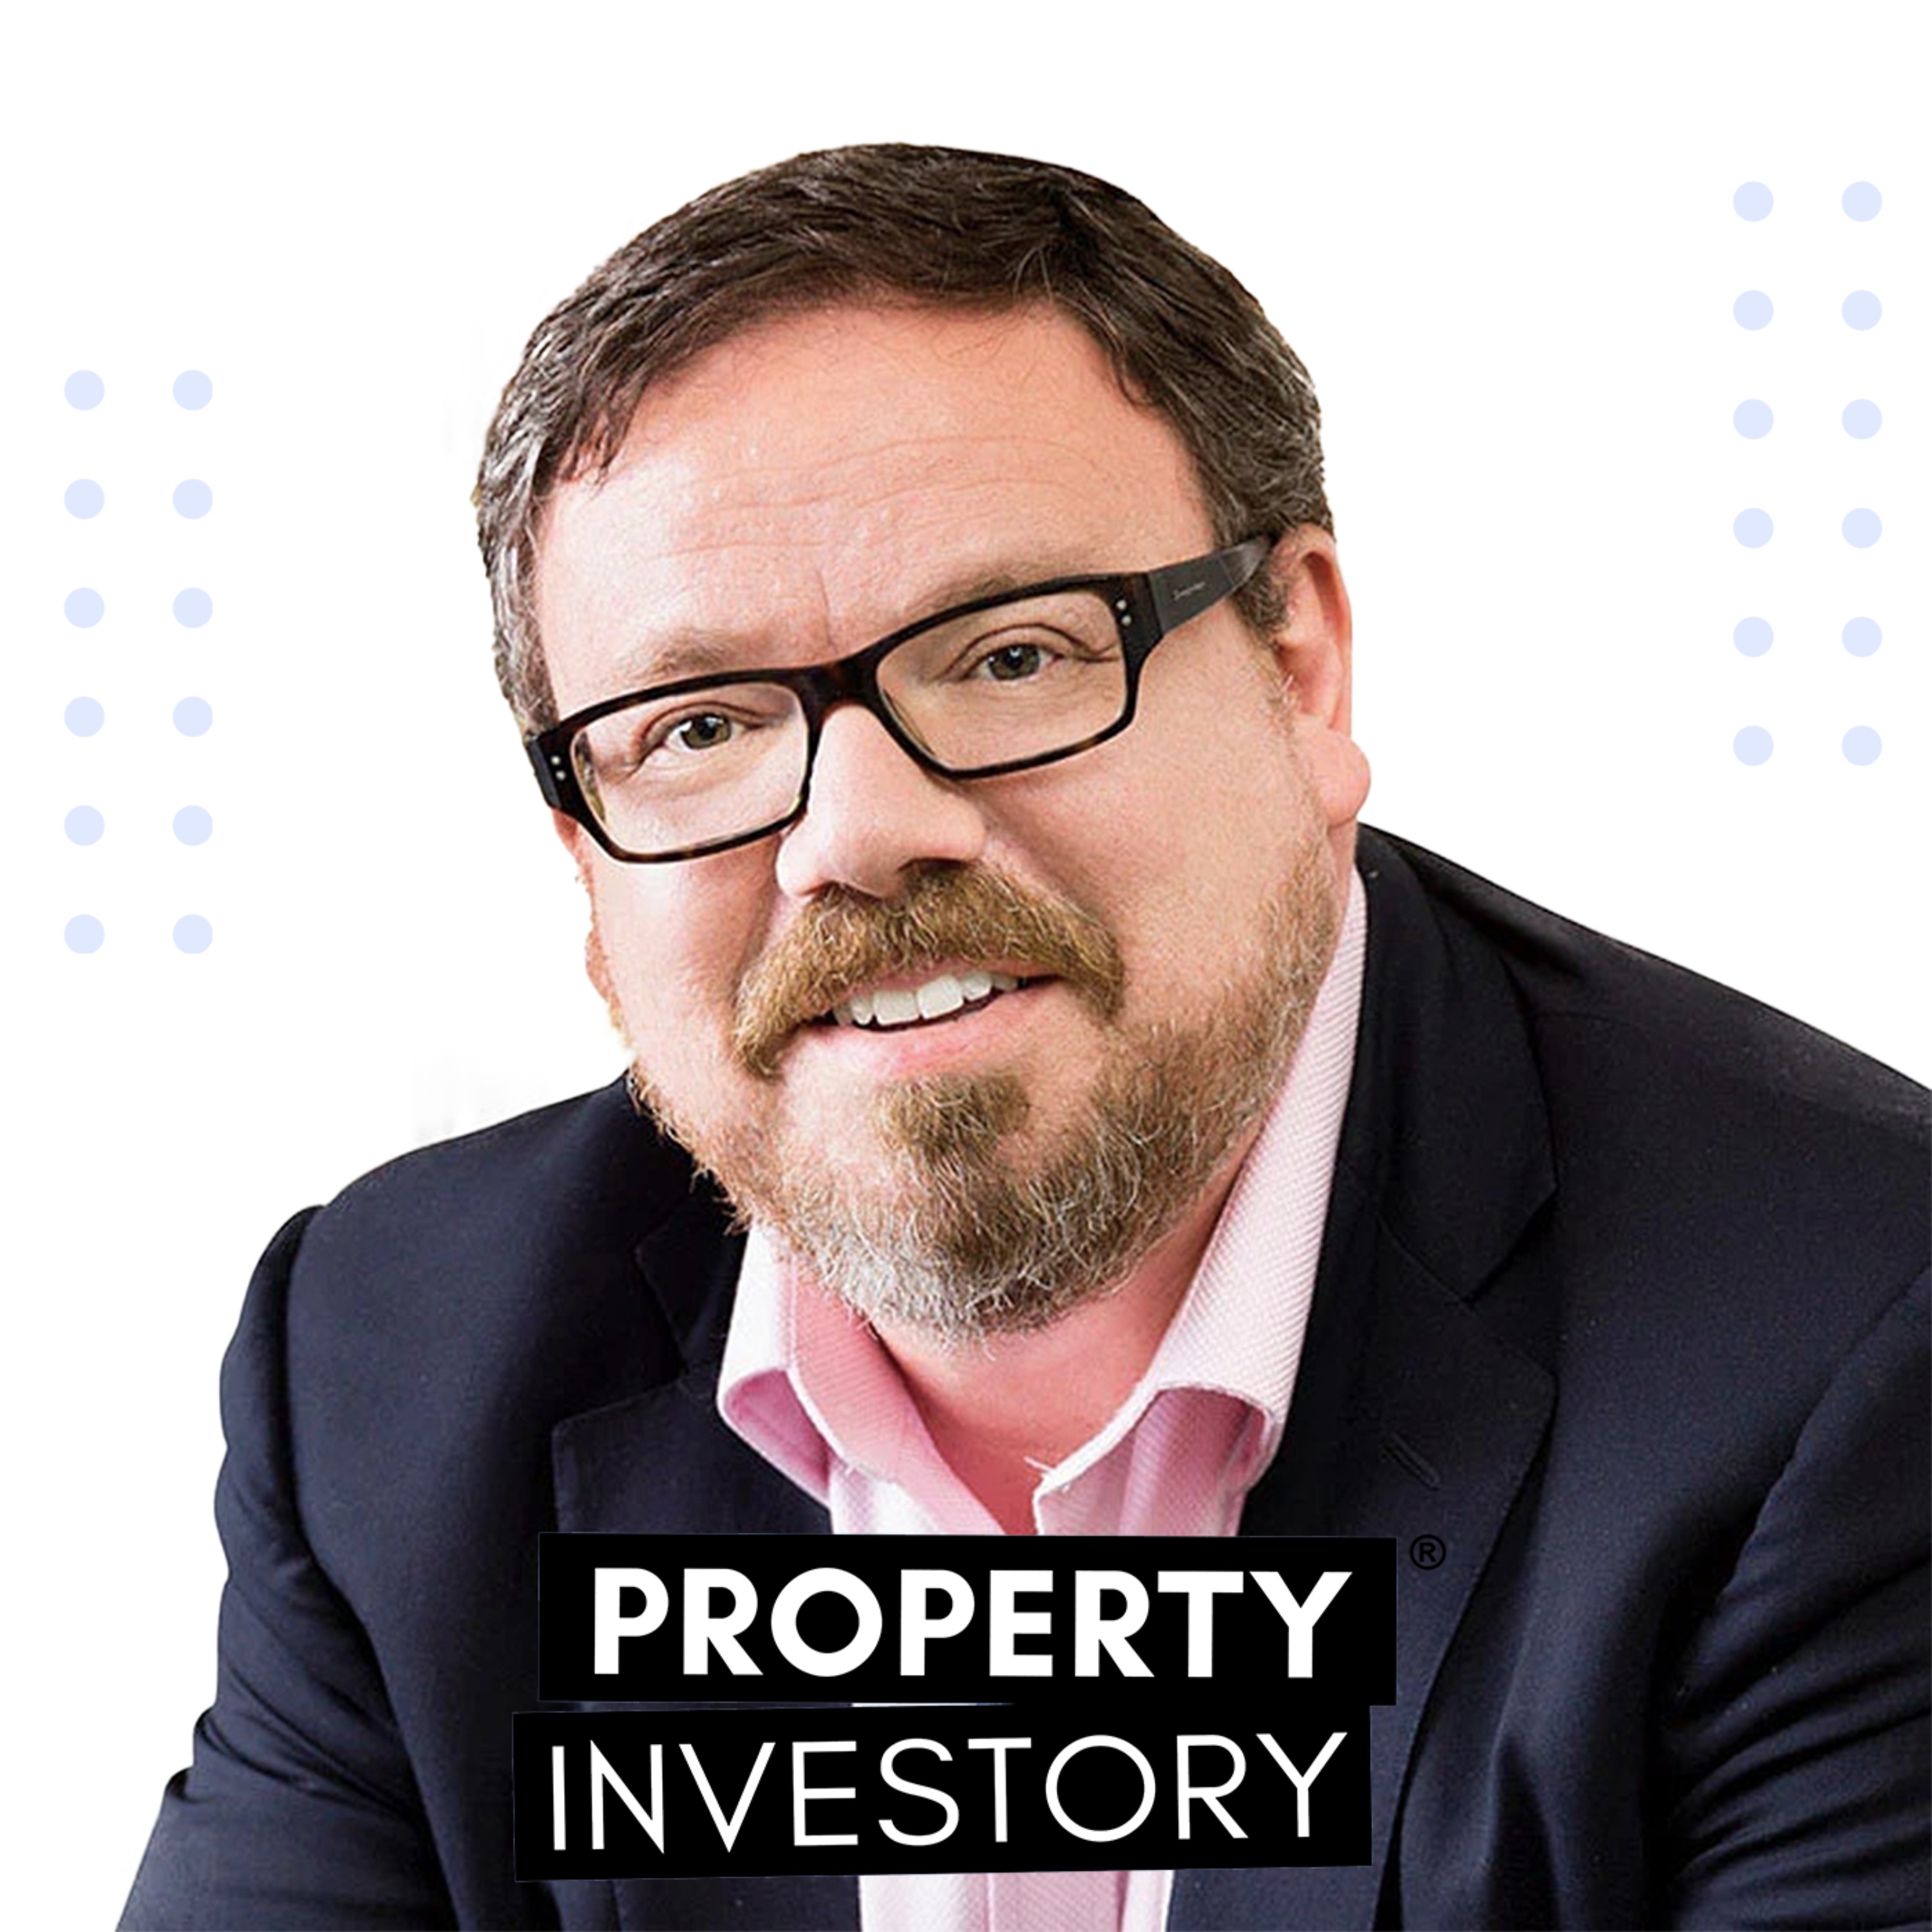 Evan Thornley Reveals the Principle of the '1% In 100' in Property